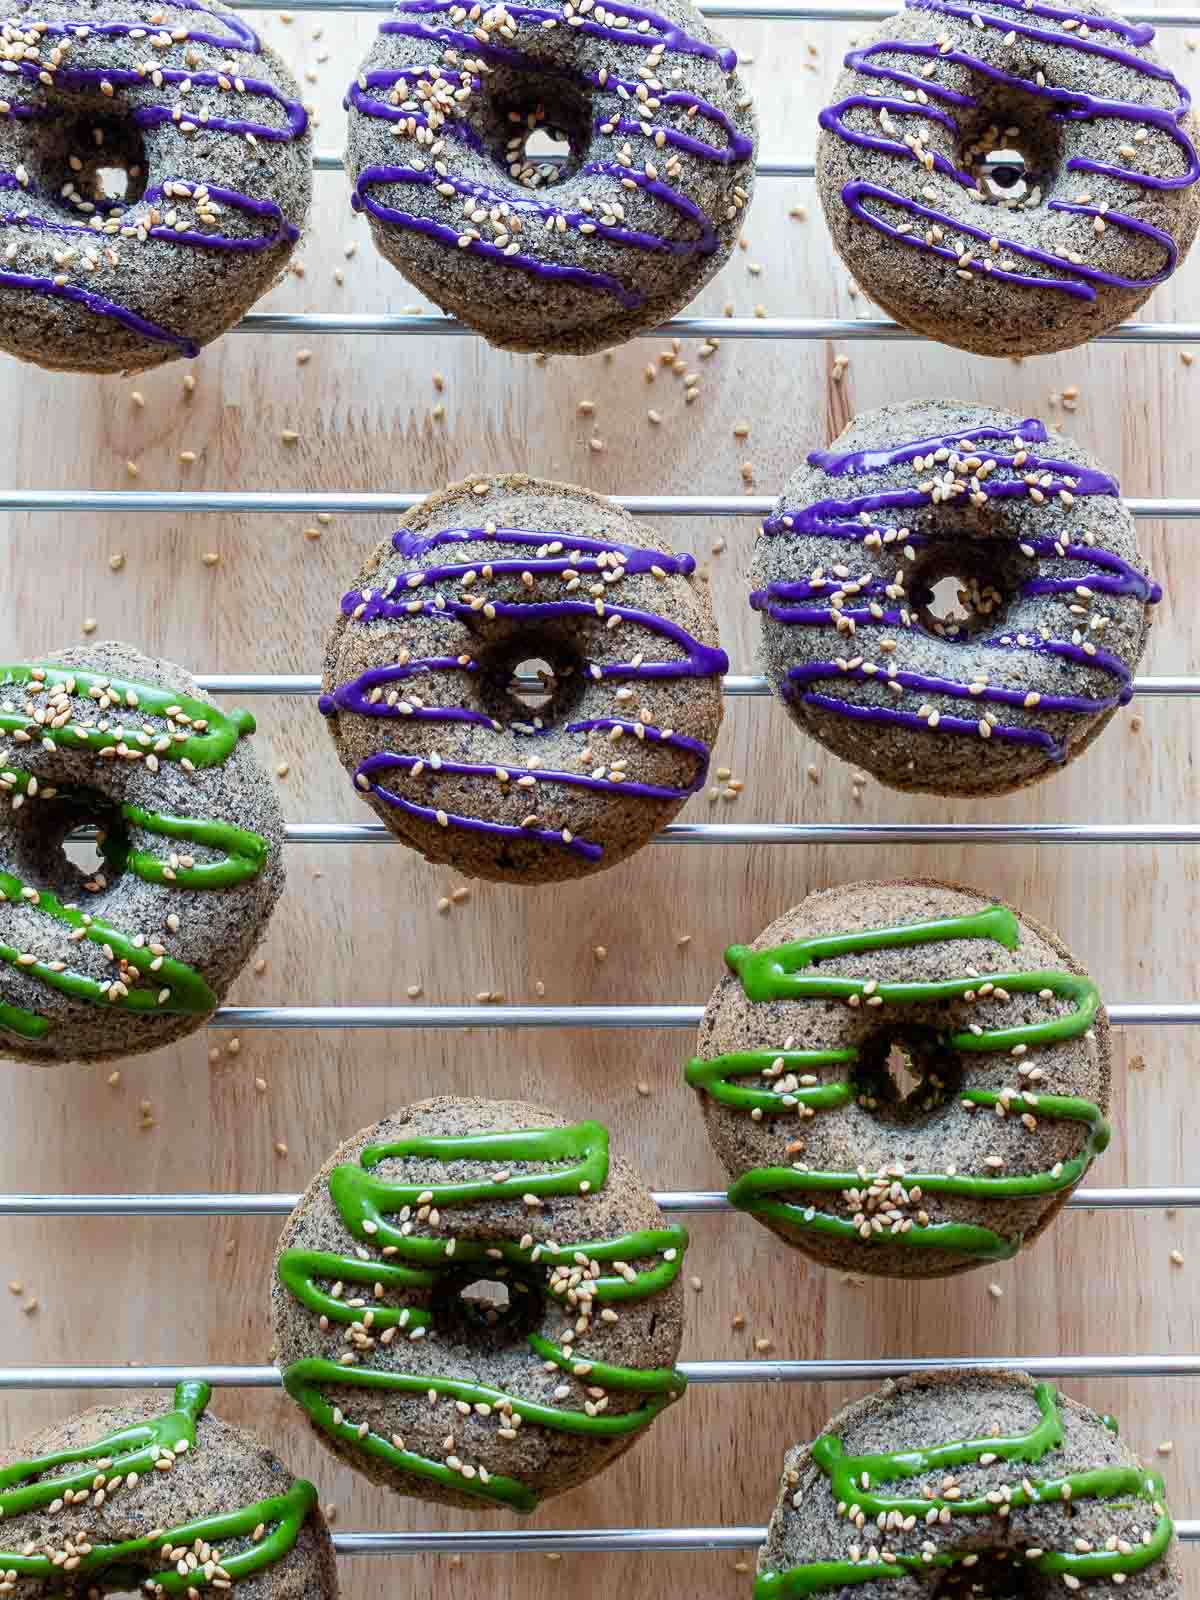 Matcha and Ube glazed baked black sesame mochi donuts drying on a wire rack.